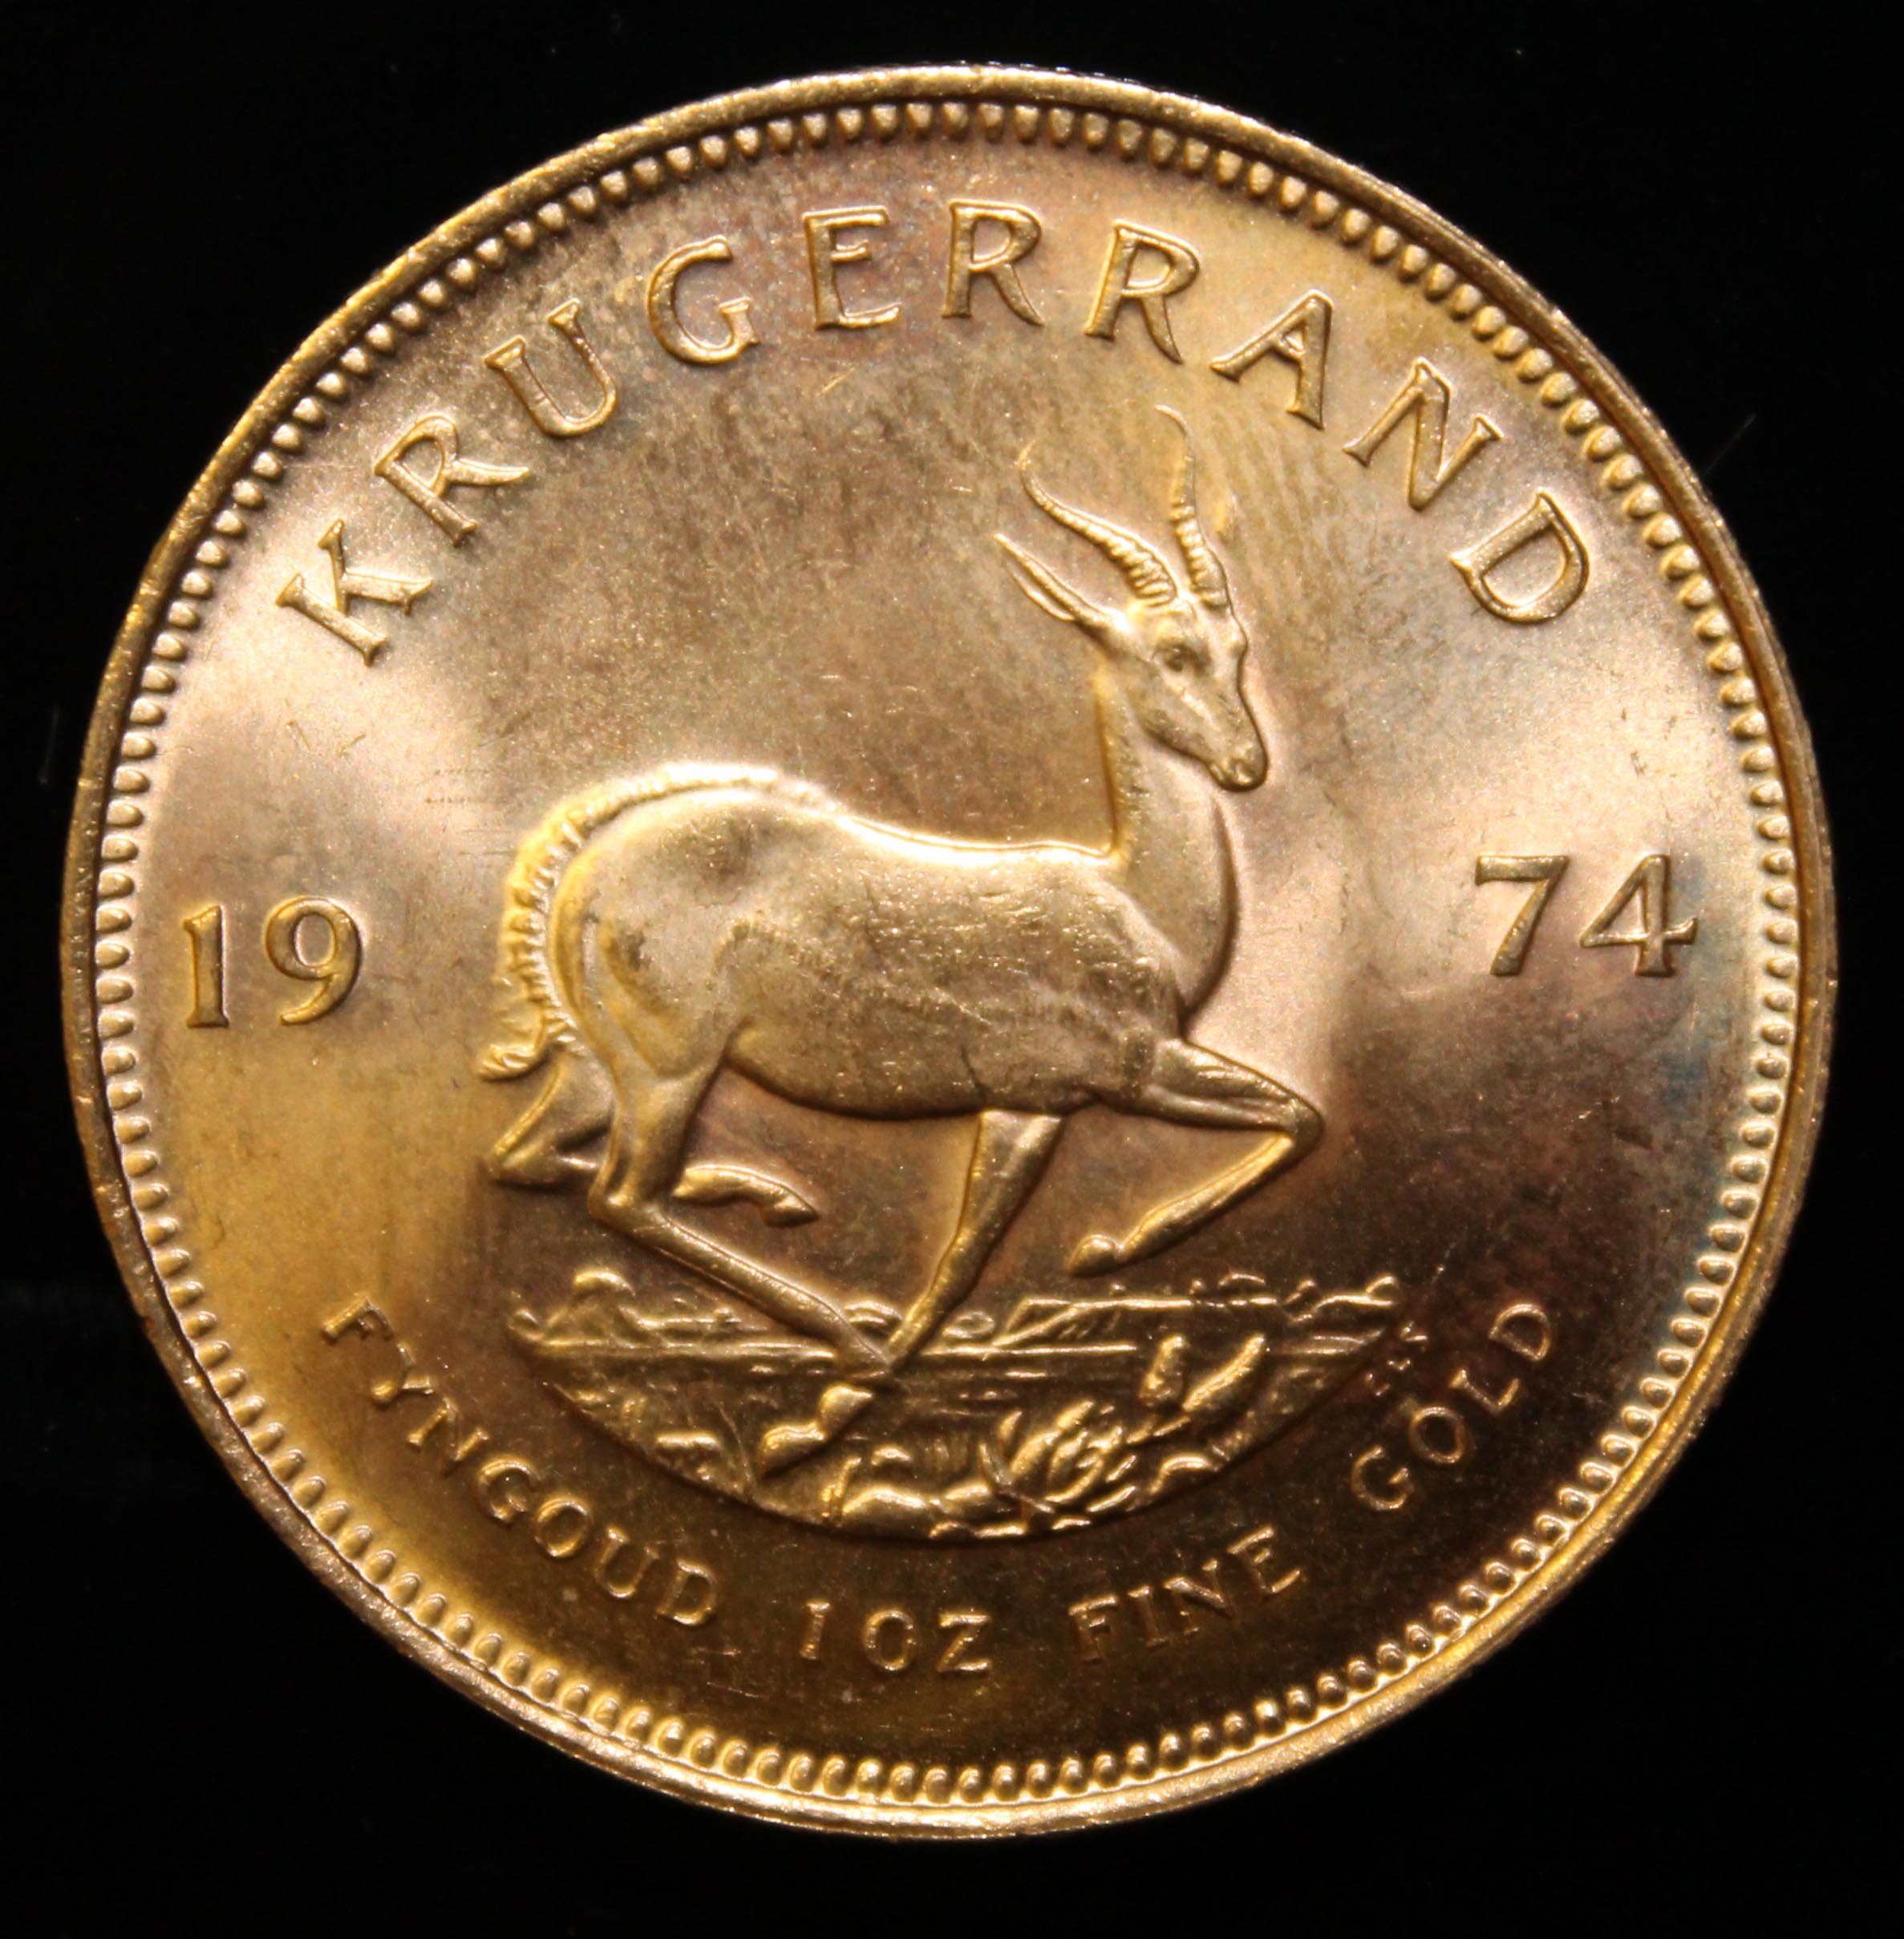 South Africa, 1974 Krugerrand, 1 oz. fine gold (91.67%) ONLY 10% BUYER'S PREMIUM (INCLUSIVE OF - Image 2 of 2